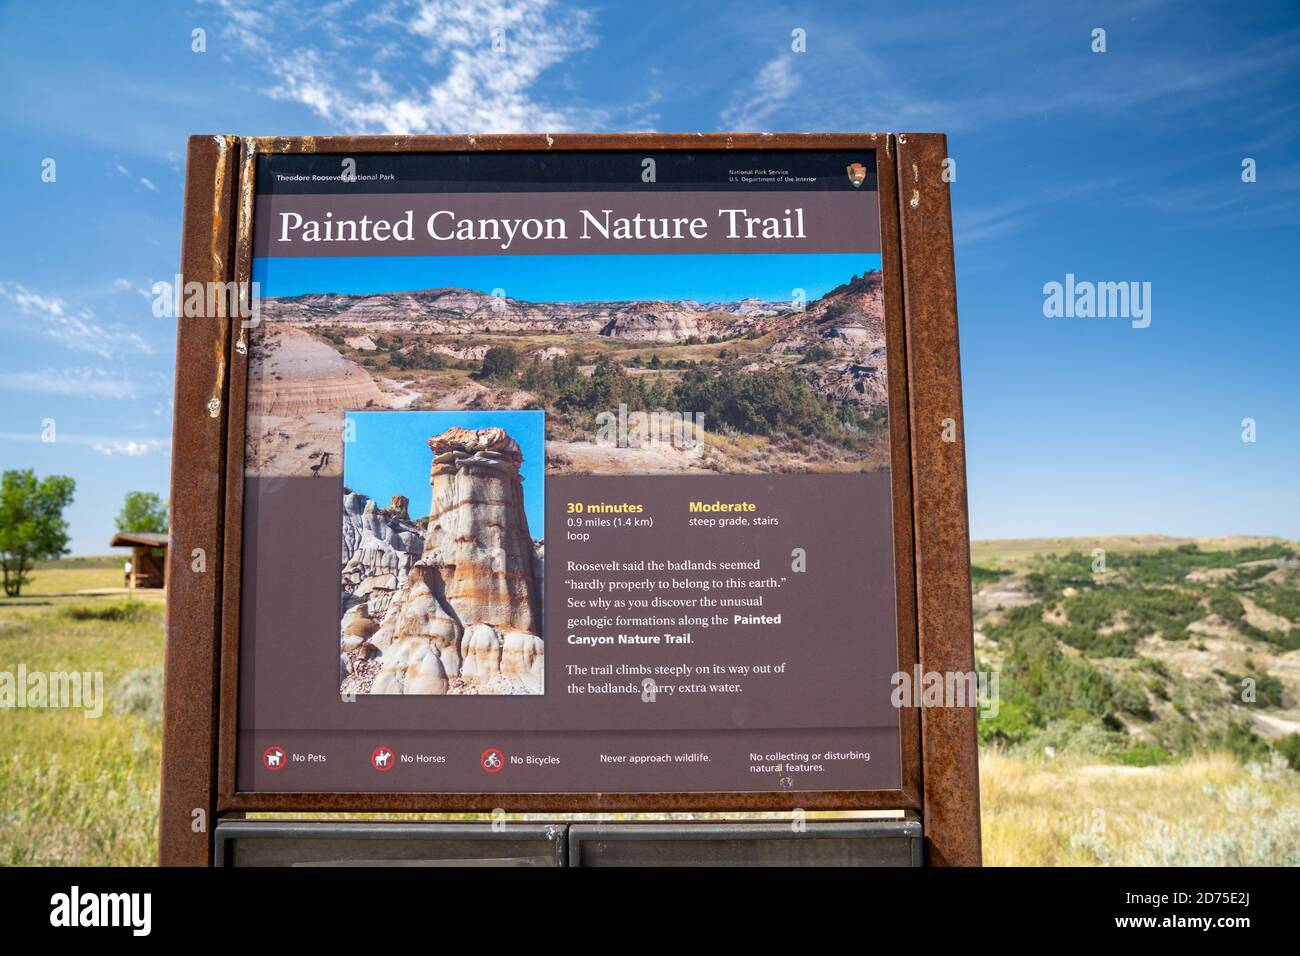 Medora, North Dakota - August 8, 2020: Sign for the Painted Canyon Nature Trail in Theodore Roosevelt National Park Stock Photo